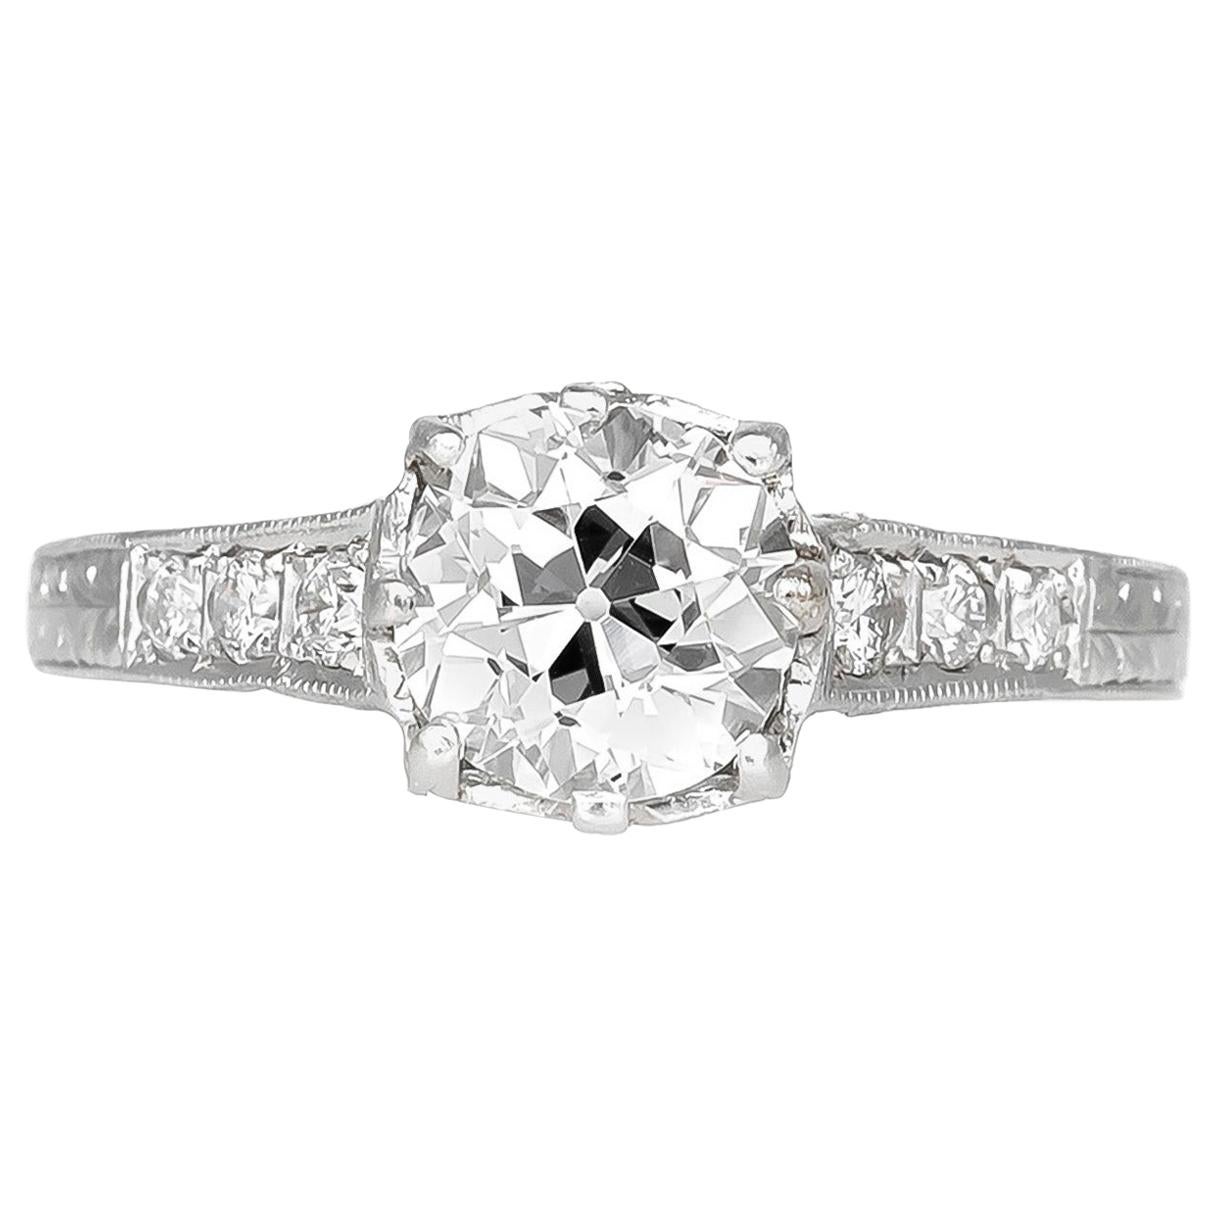 1930s Engagement Ring with Center 1.15 Carat